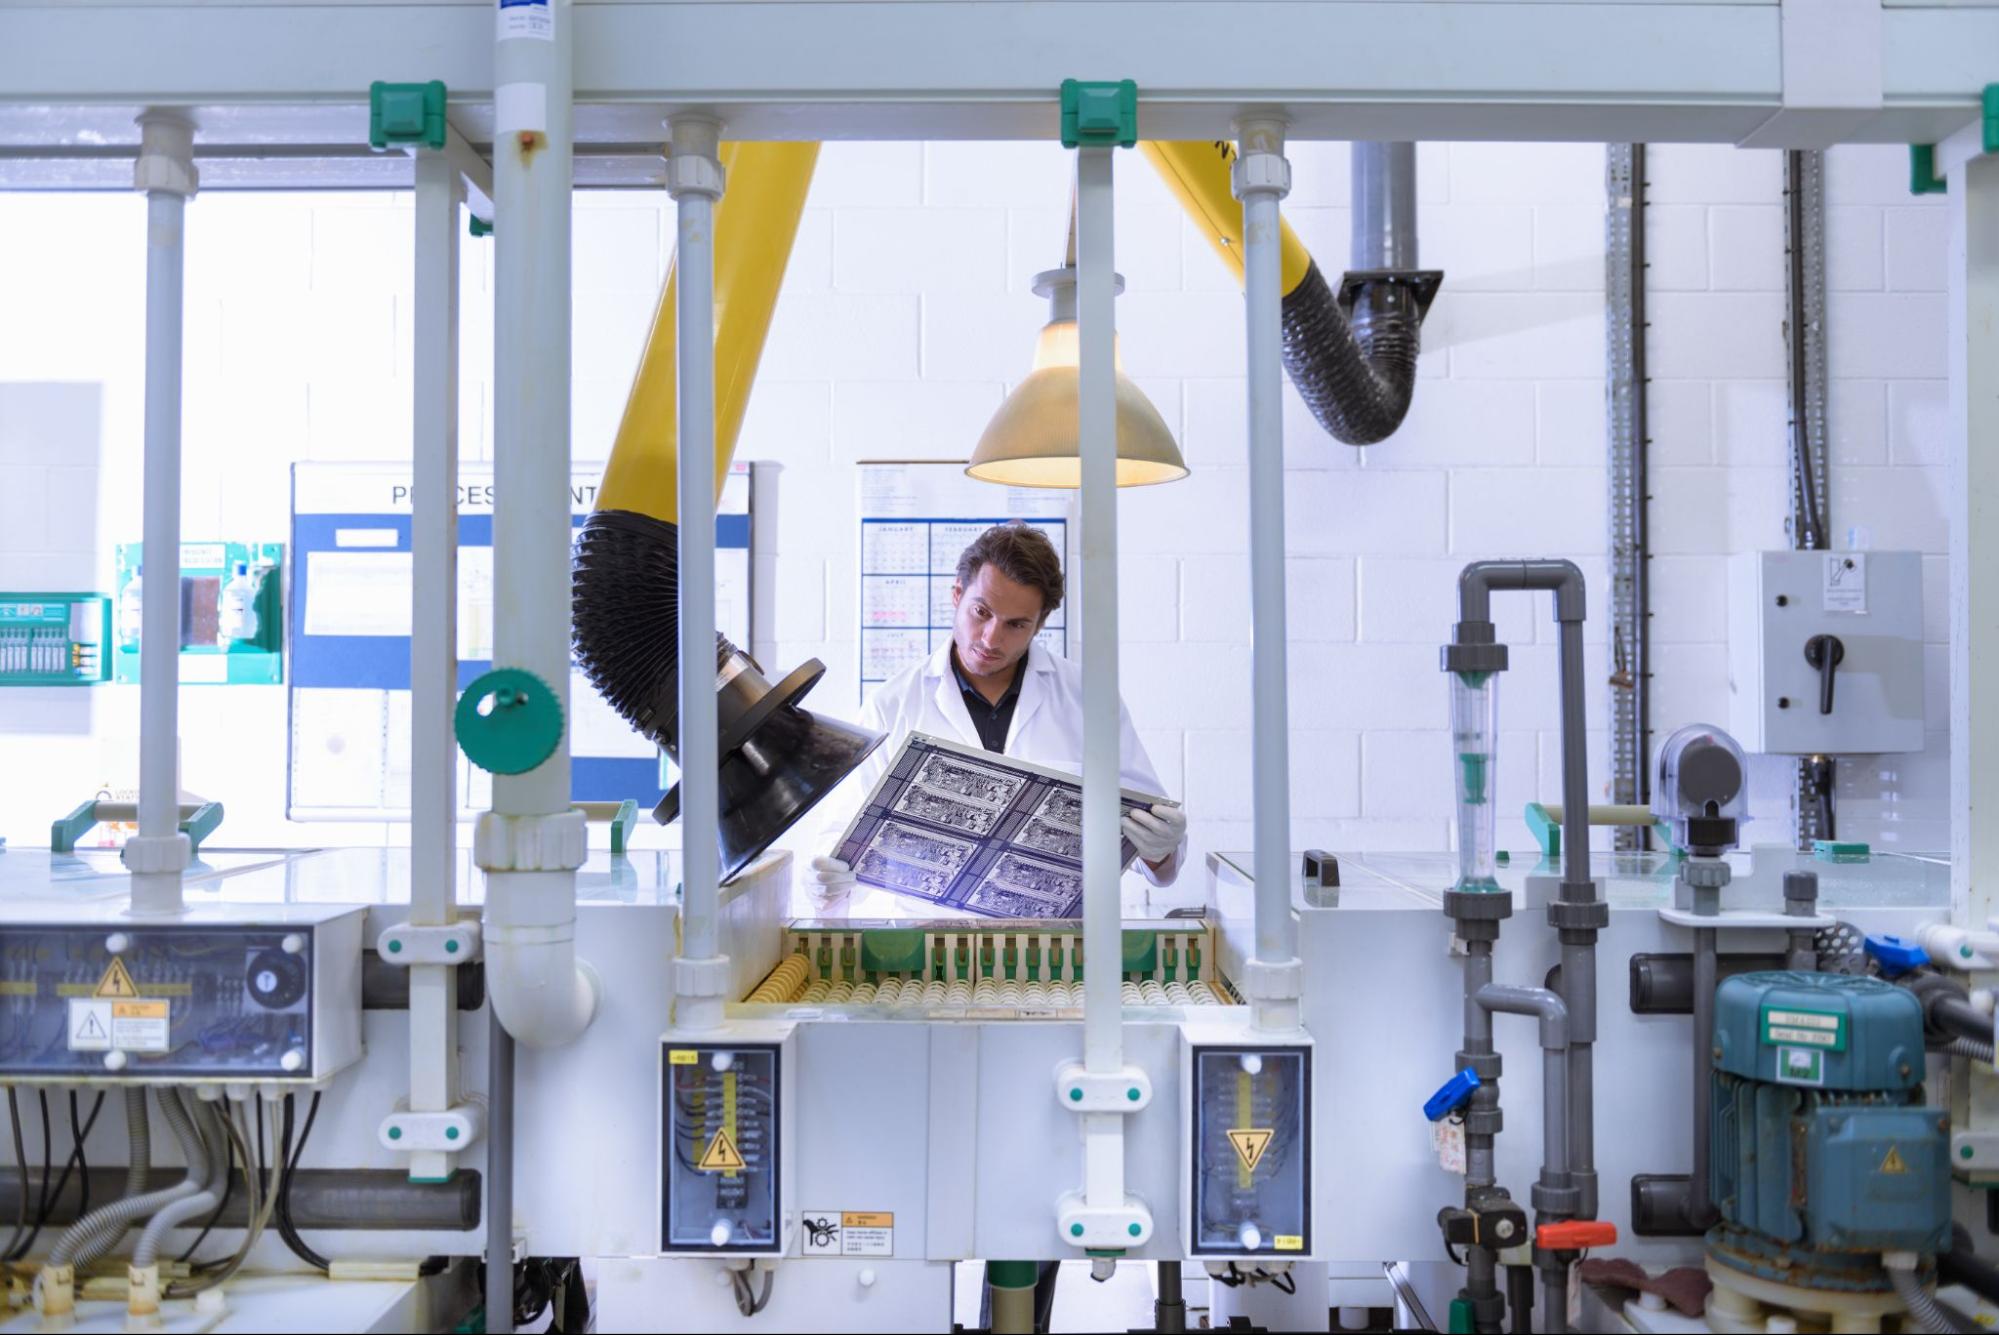 Man looking at a PCB board in a factory with machinery